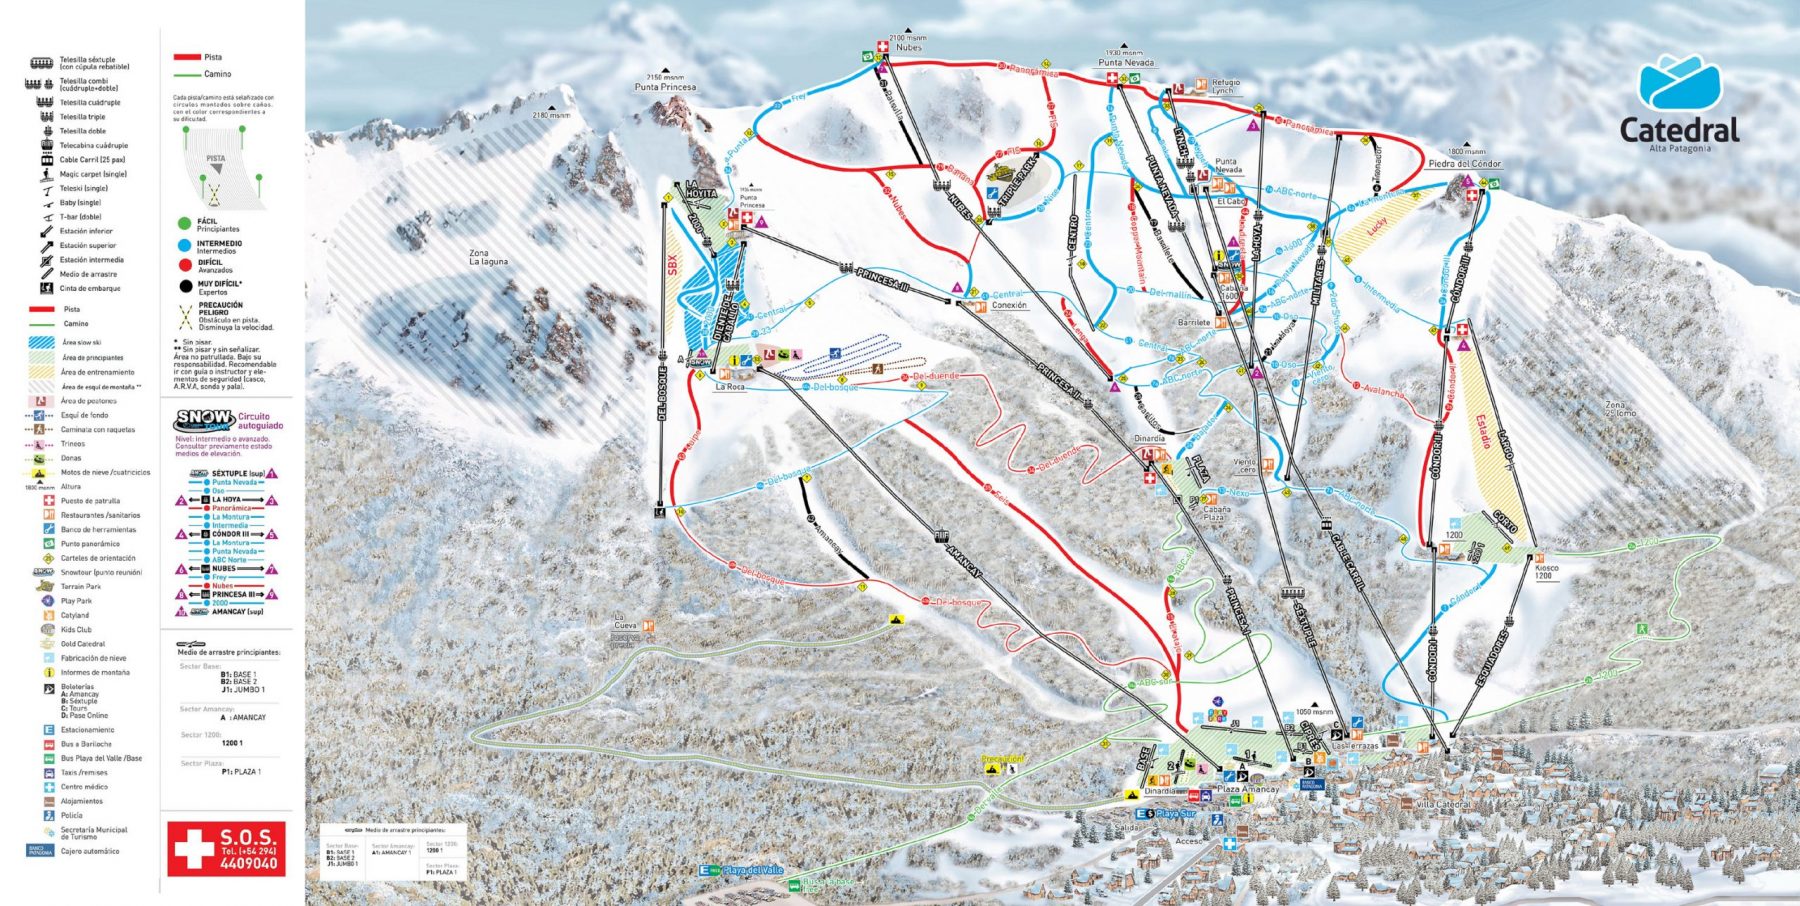 Ski map Catedral Alta Patagonia. Cerro Catedral has opened: skiing for locals with masks and record snow levels.